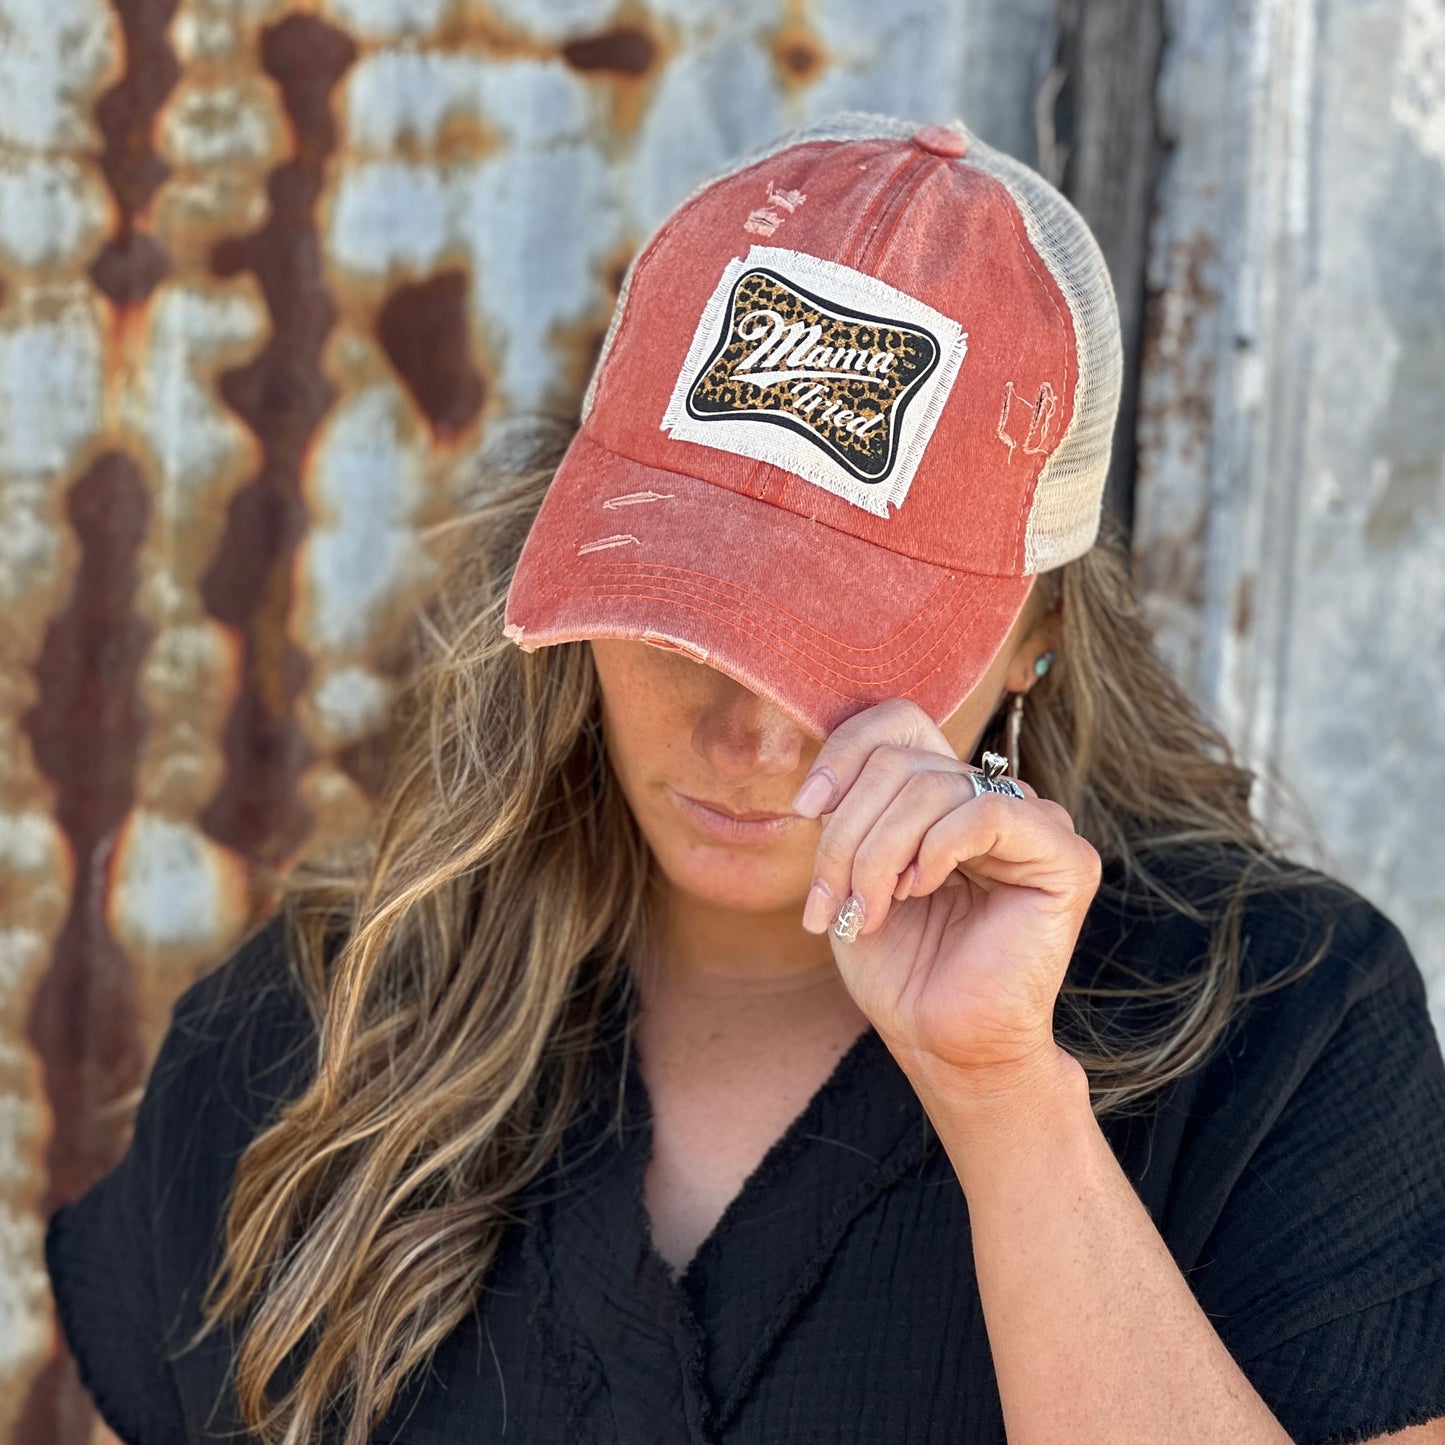 Womens distressed Orange baseball cap with material patch with saying" Mama Tried" with leopard backround. 